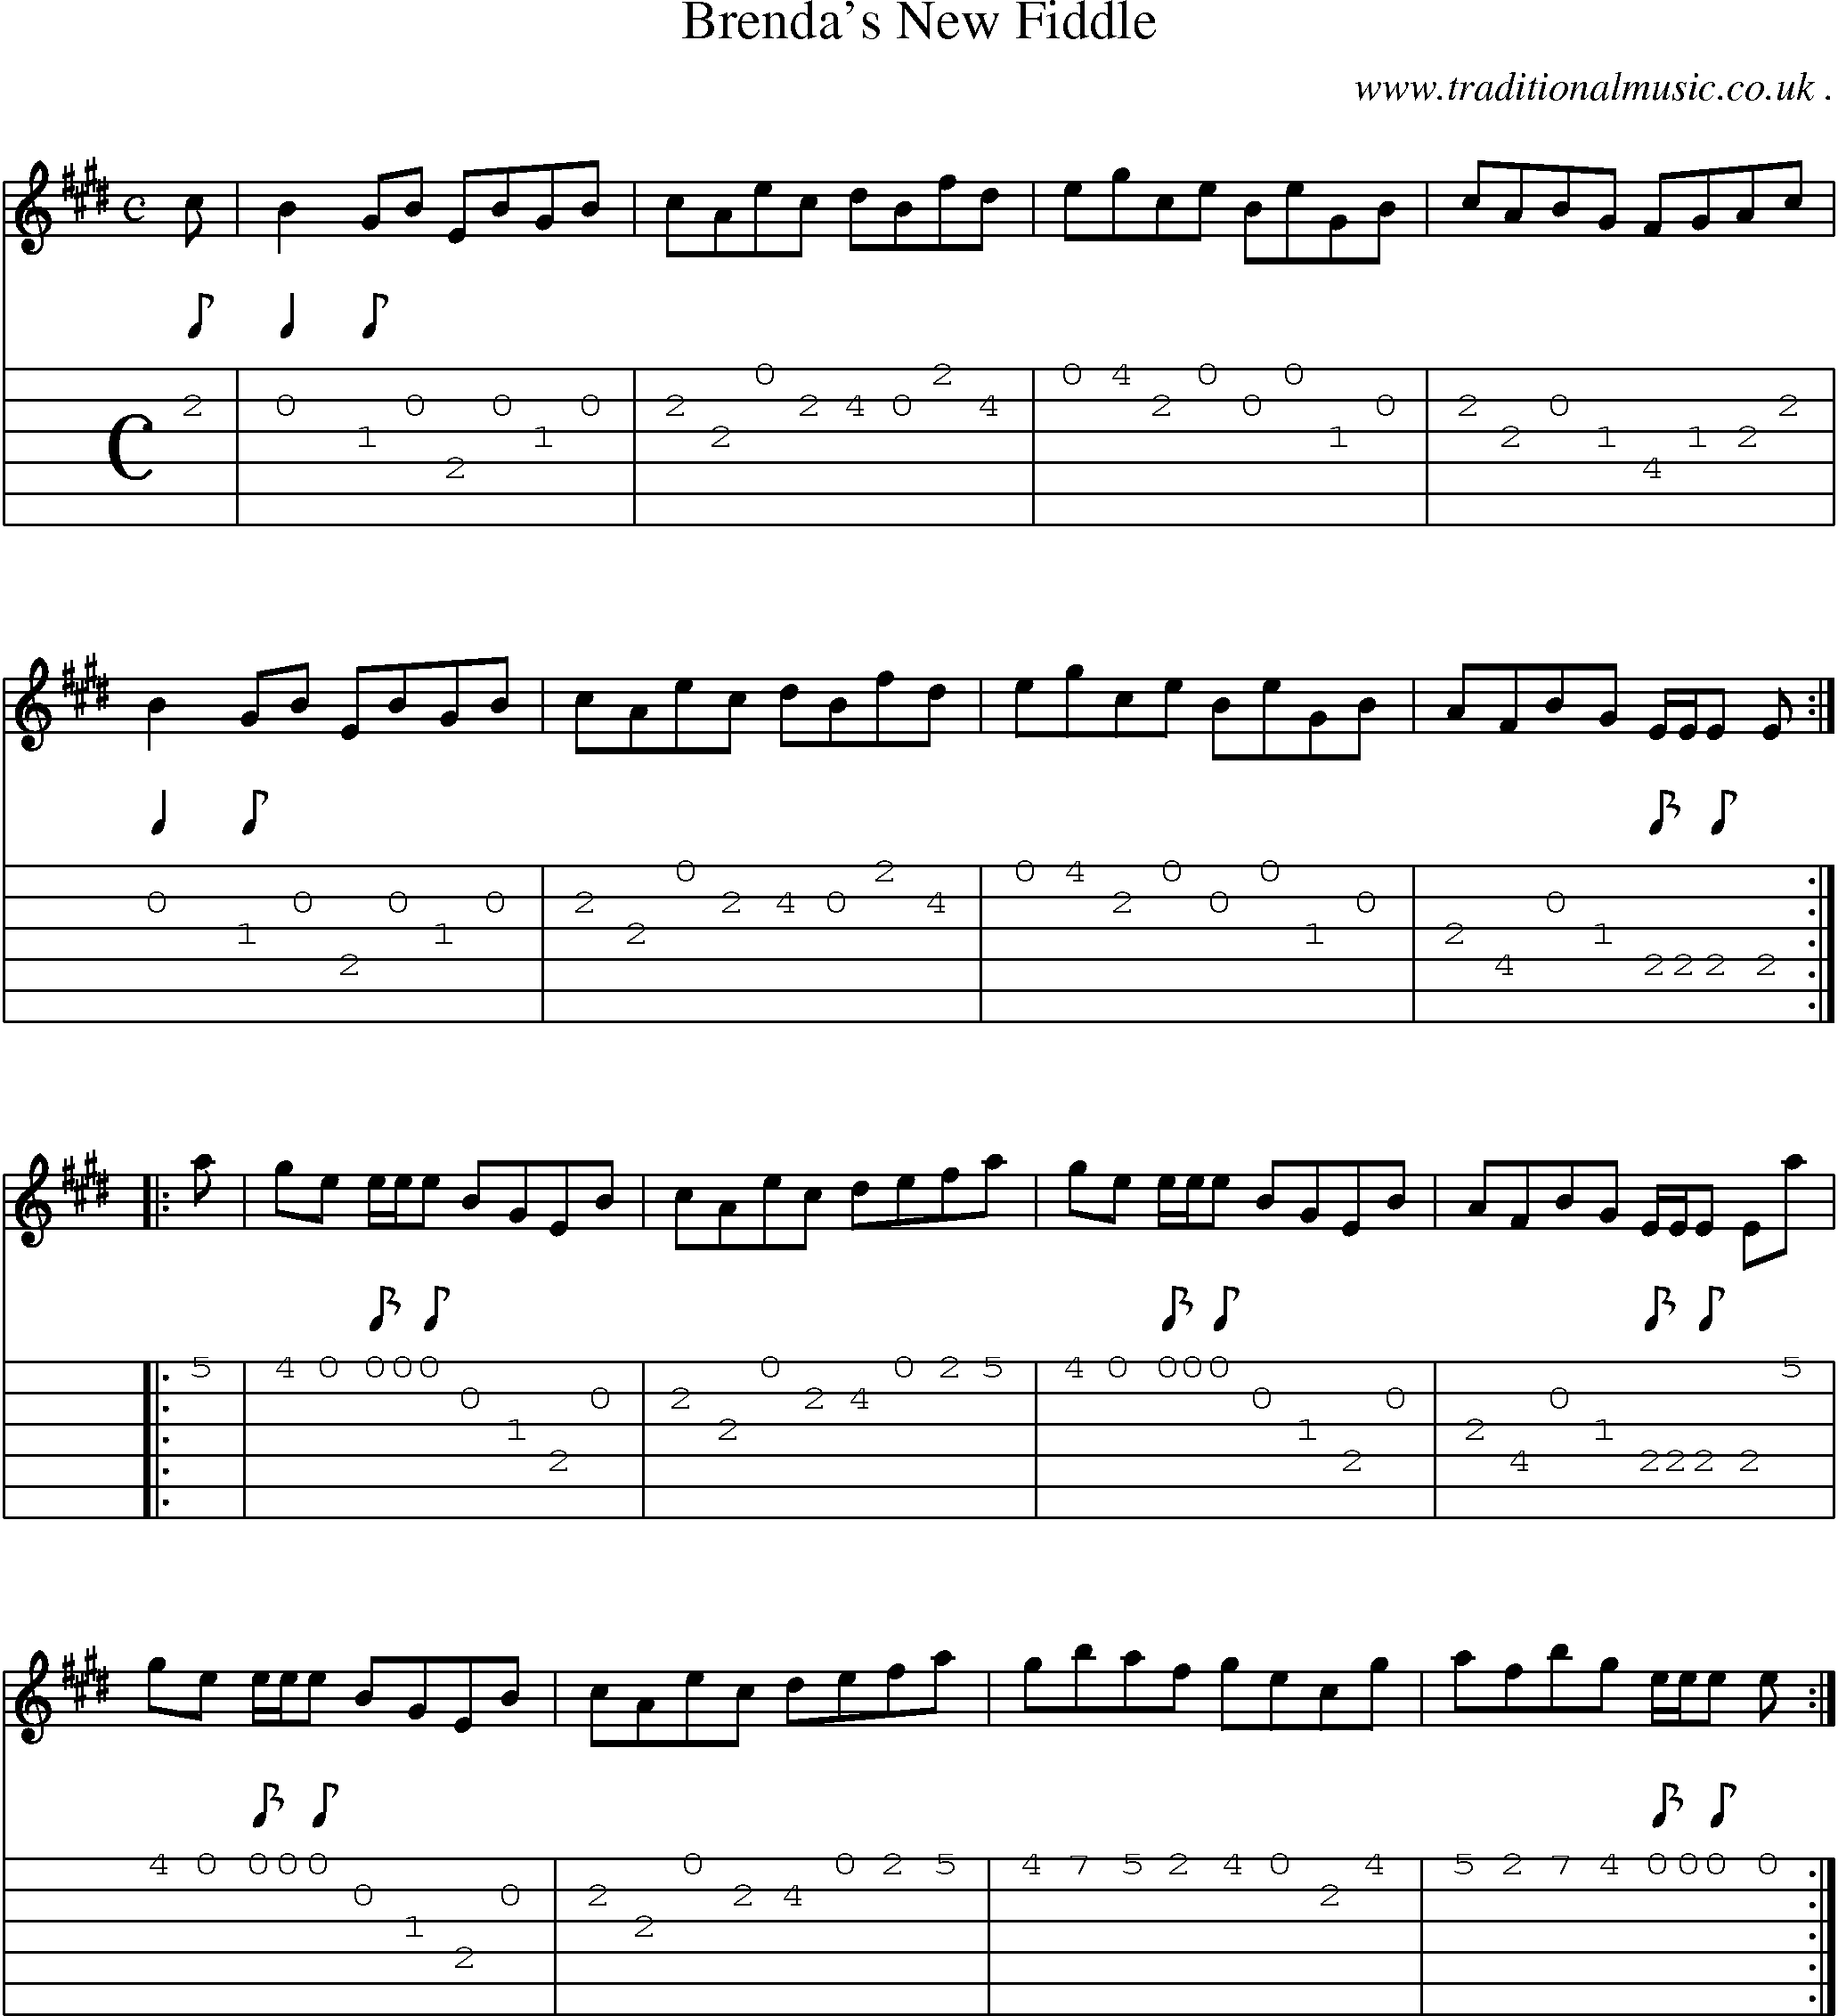 Sheet-Music and Guitar Tabs for Brendas New Fiddle